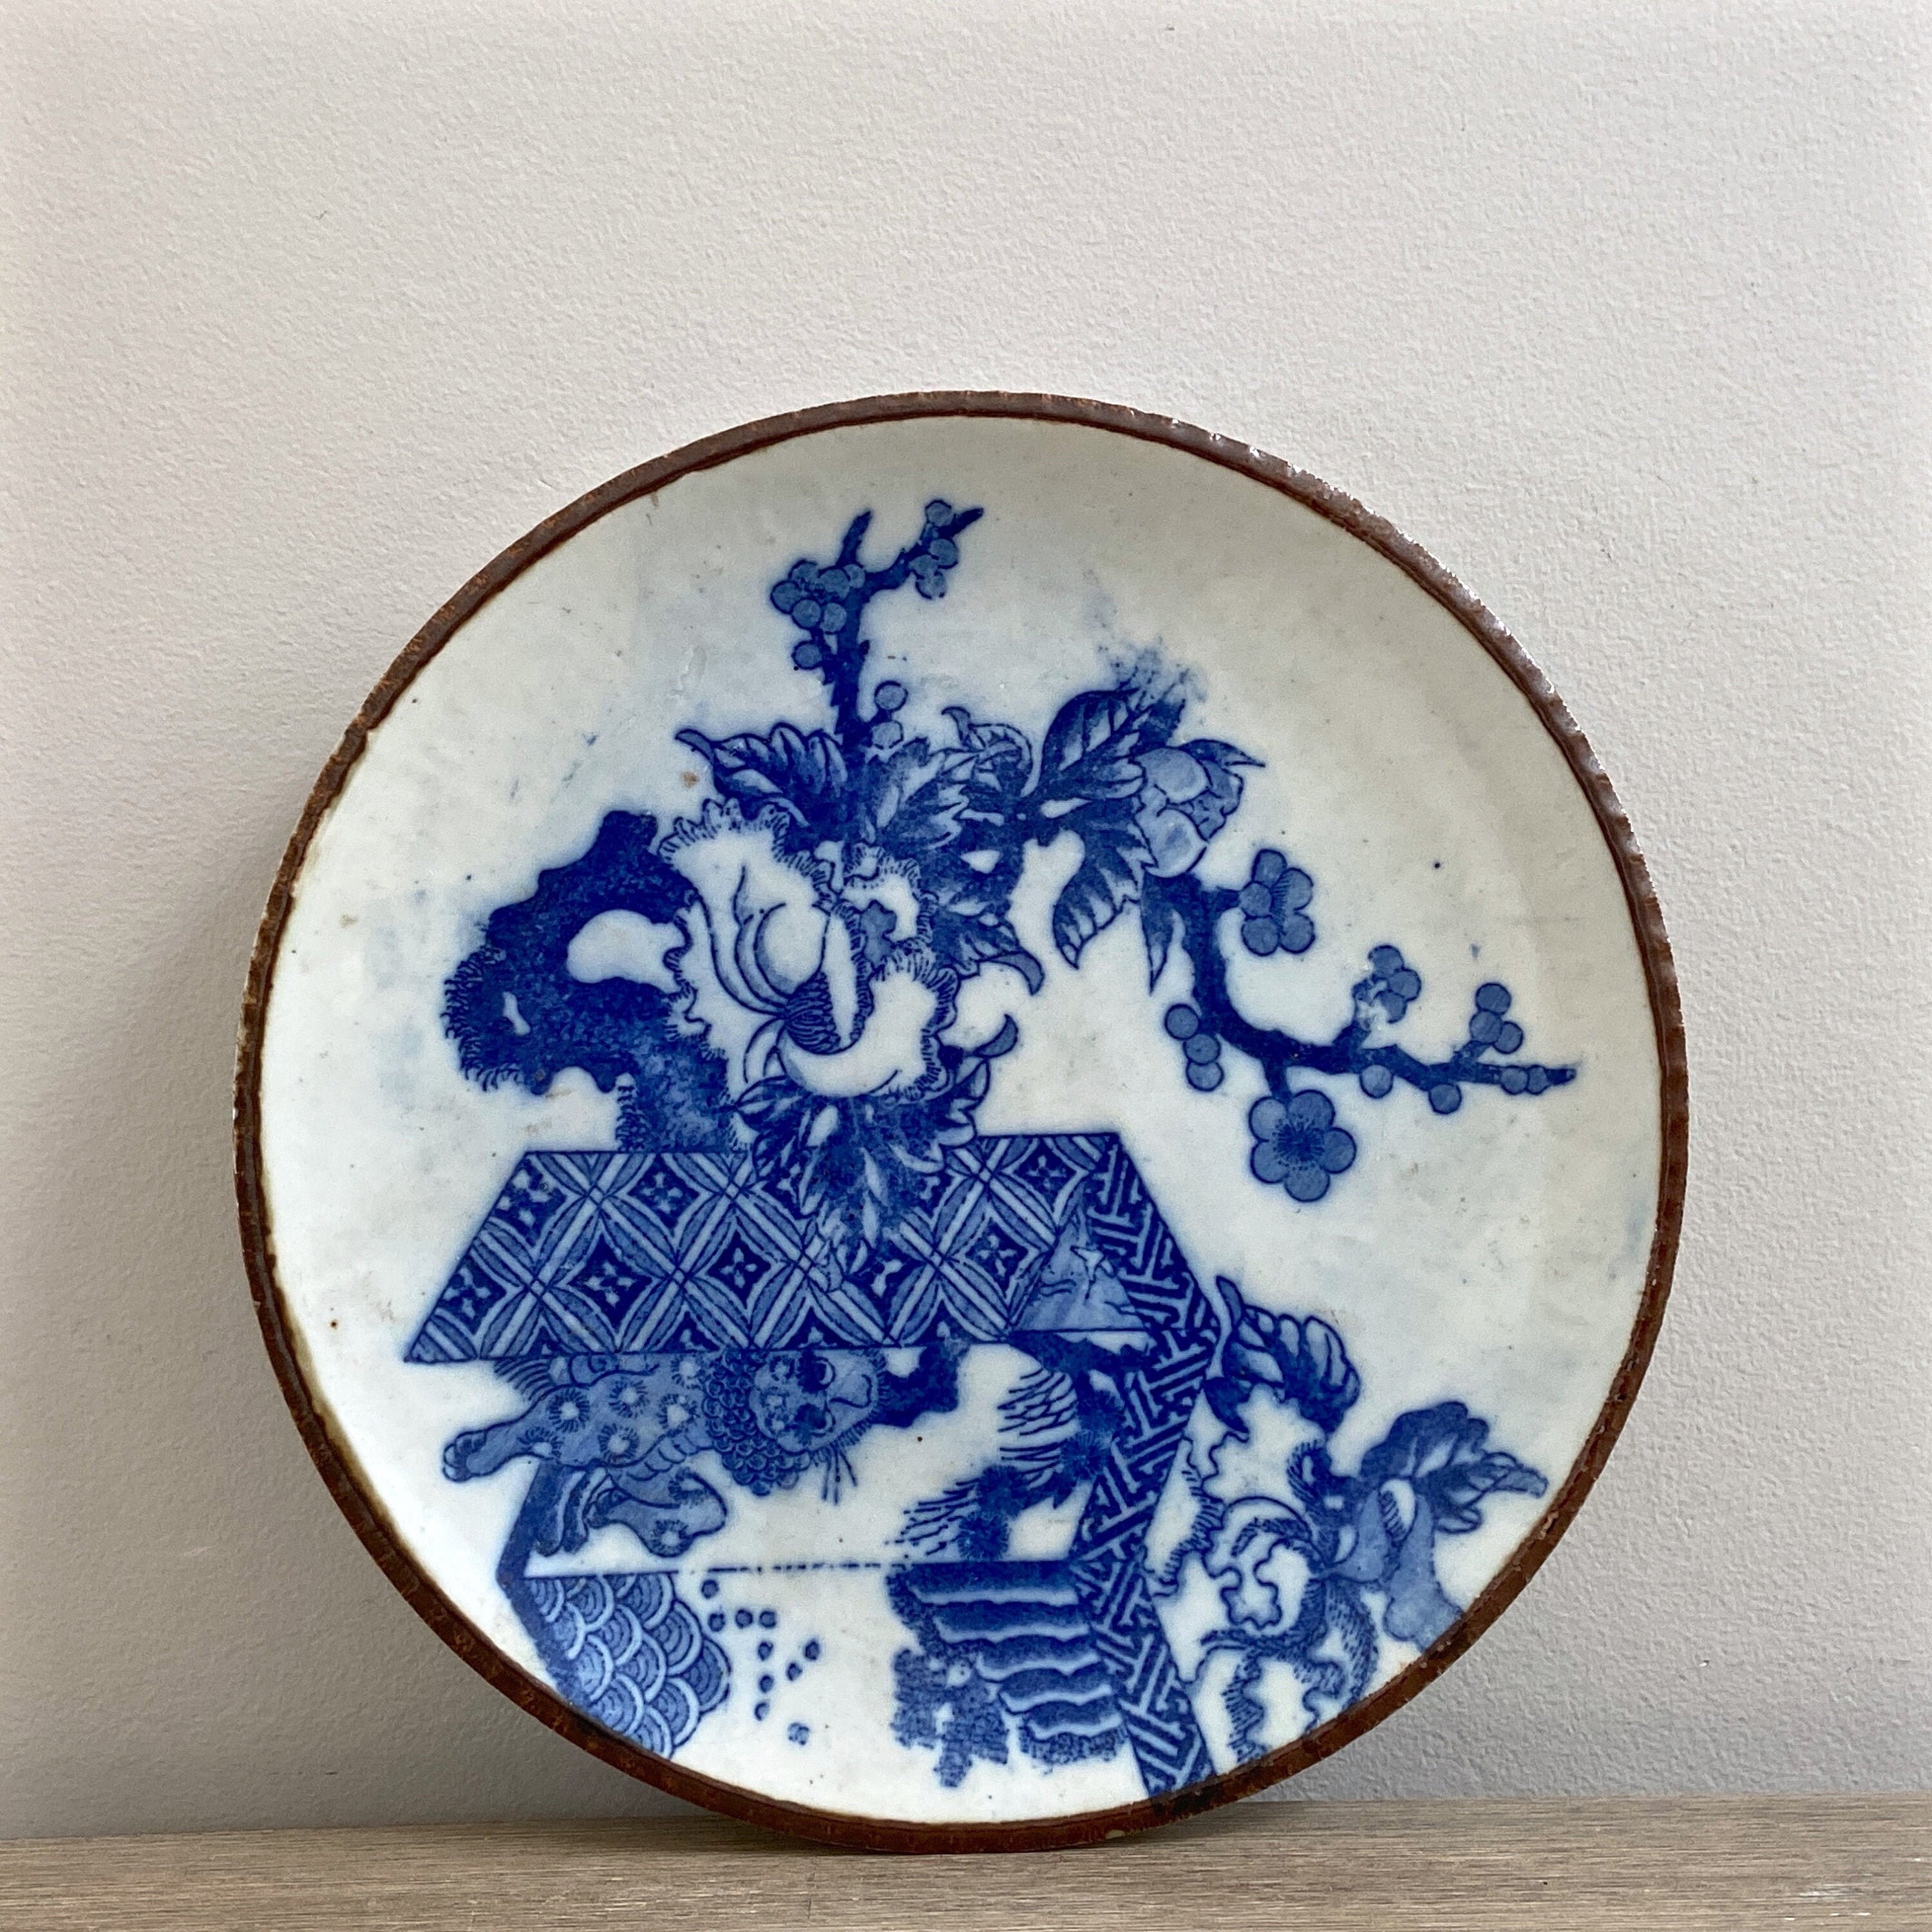 Large Igezara blue and white Japanese porcelain charger of three winter friends 